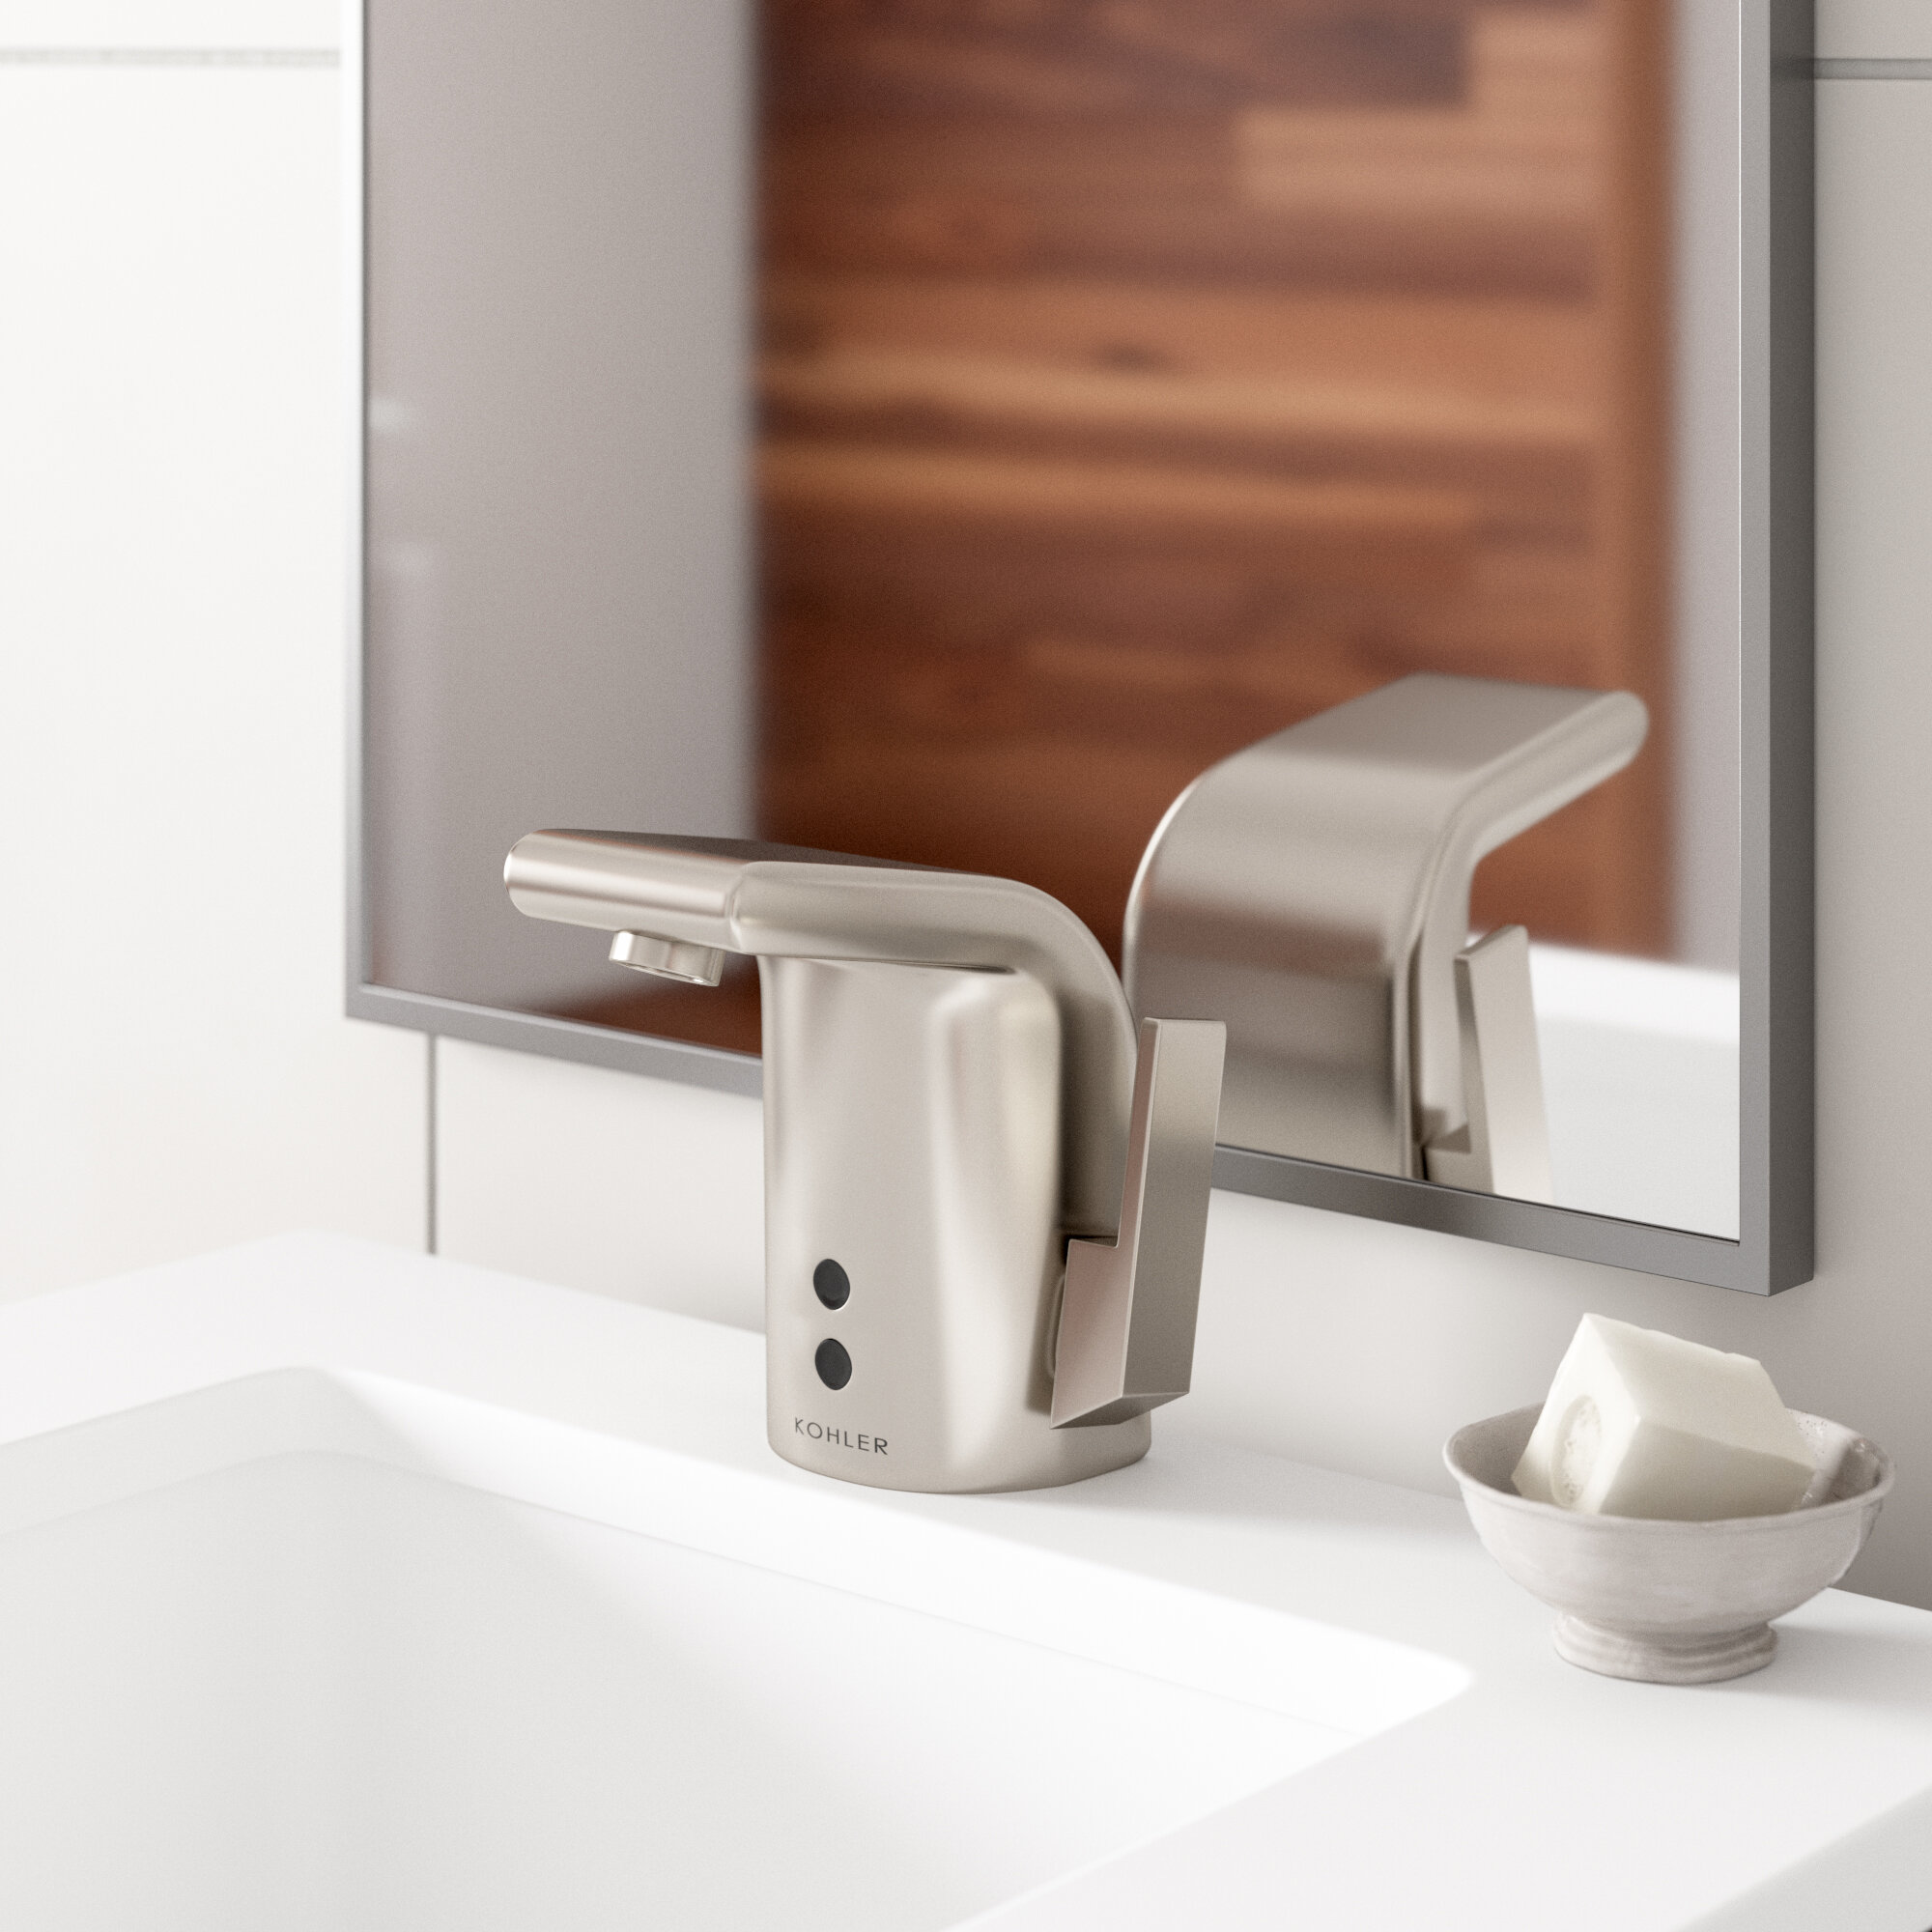 Kohler Sculpted Single-Hole Touchless Hybrid Energy Cell-Powered Commercial  Bathroom Sink Faucet with Insight Technology, Temperature Mixer and 5-3/4